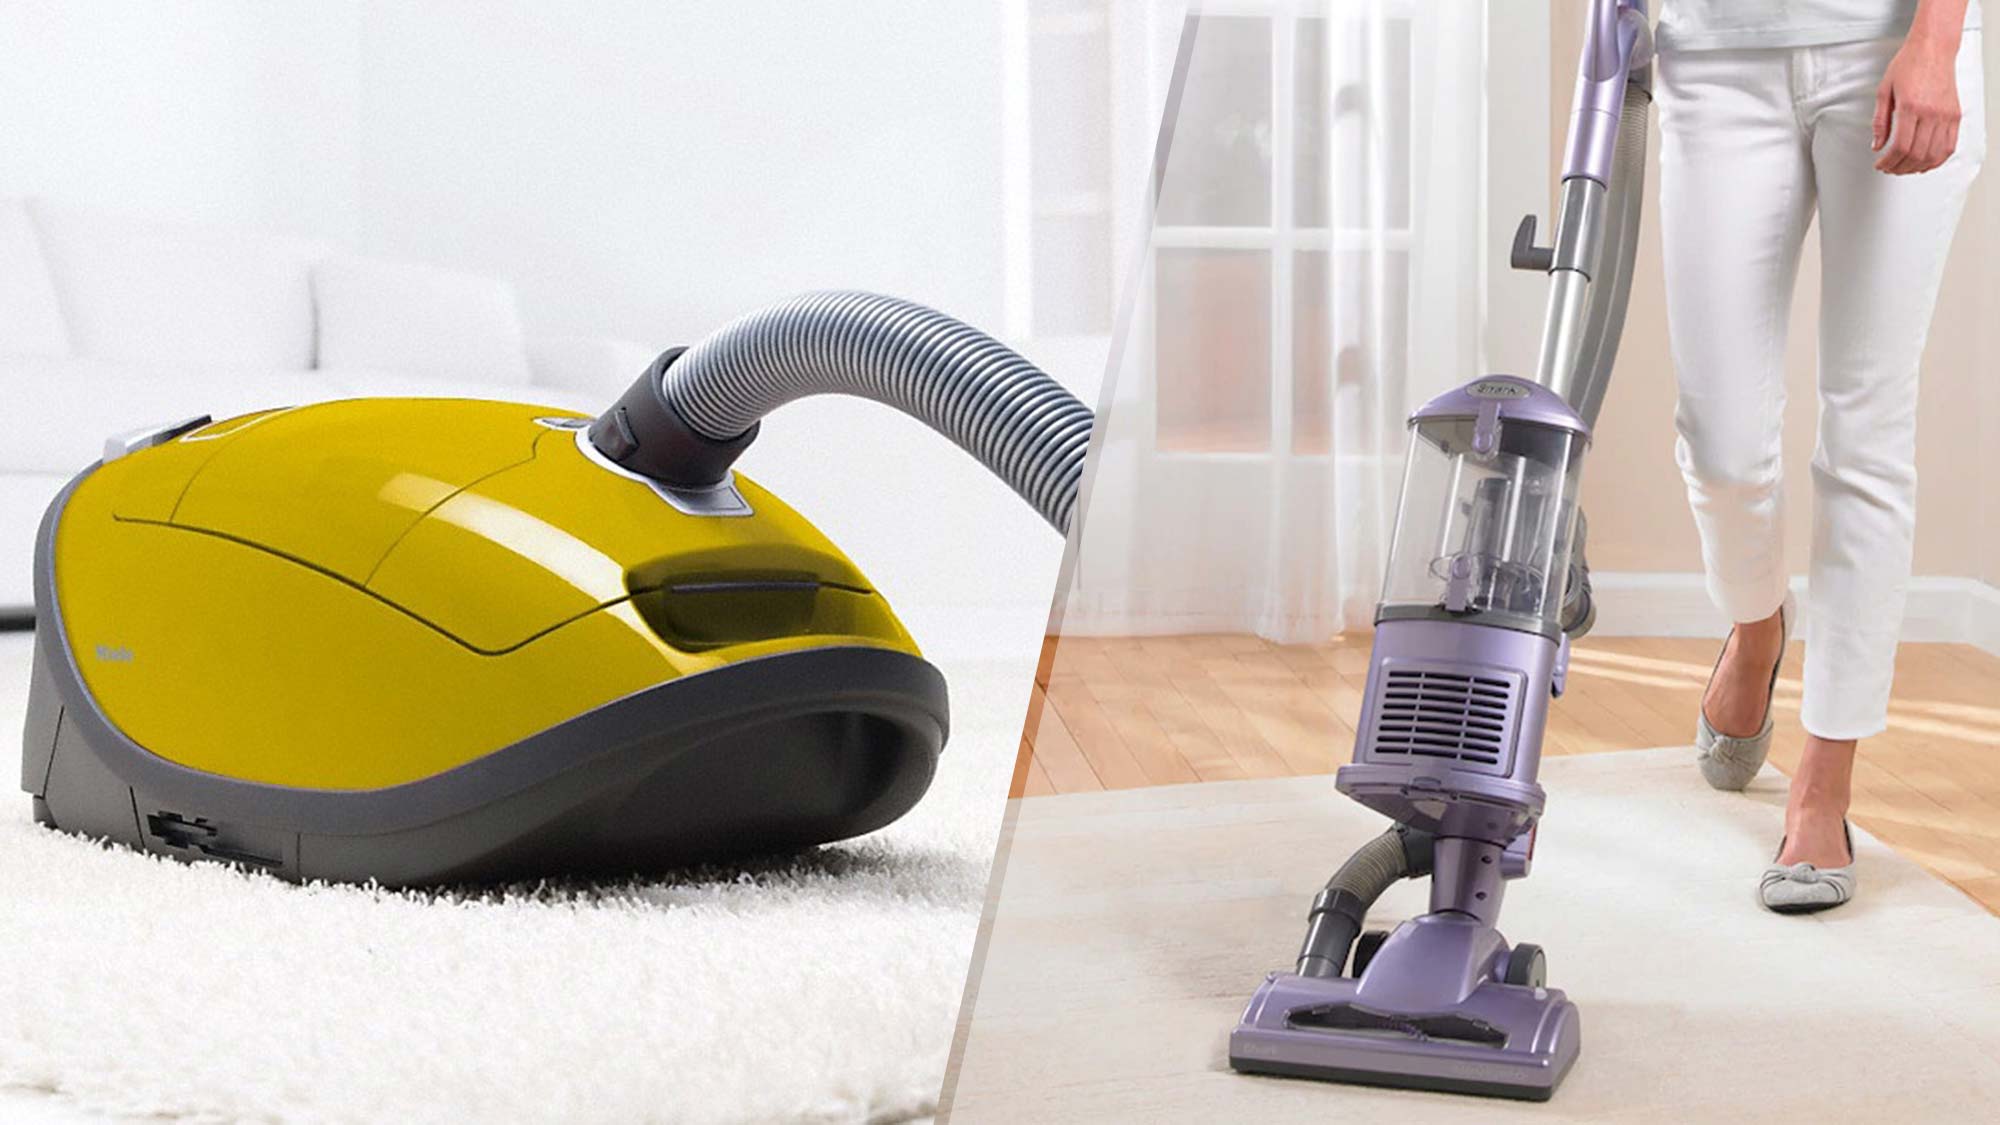 Bagless vs. bagged vacuum cleaners: Here's how to decide which is